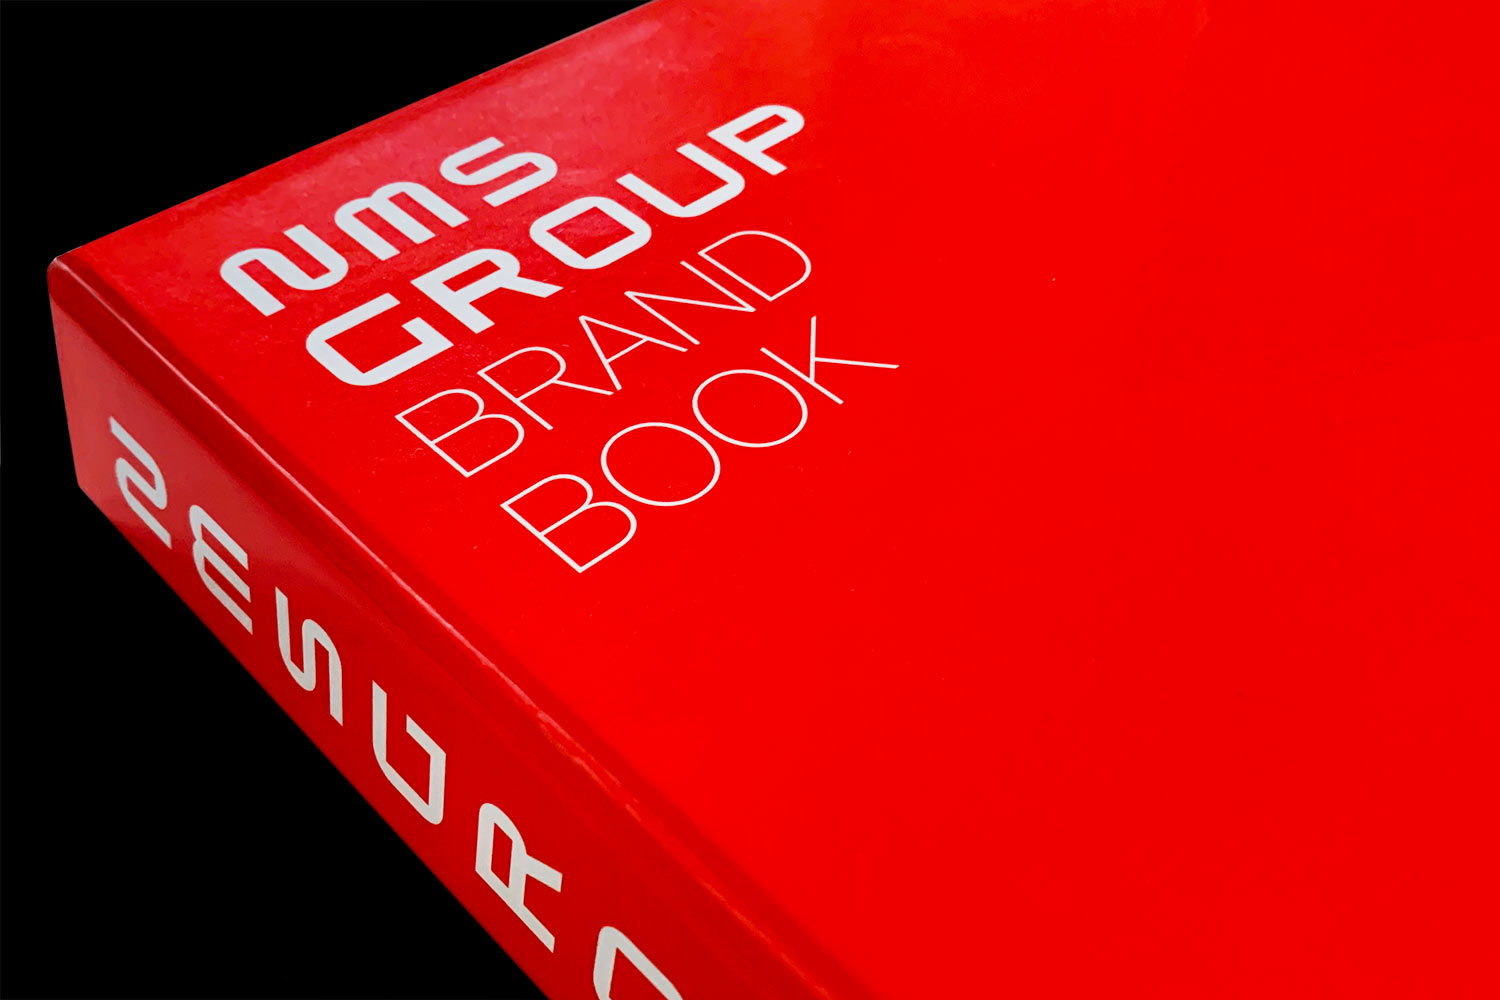 nms group brand book corporate identity guidelines